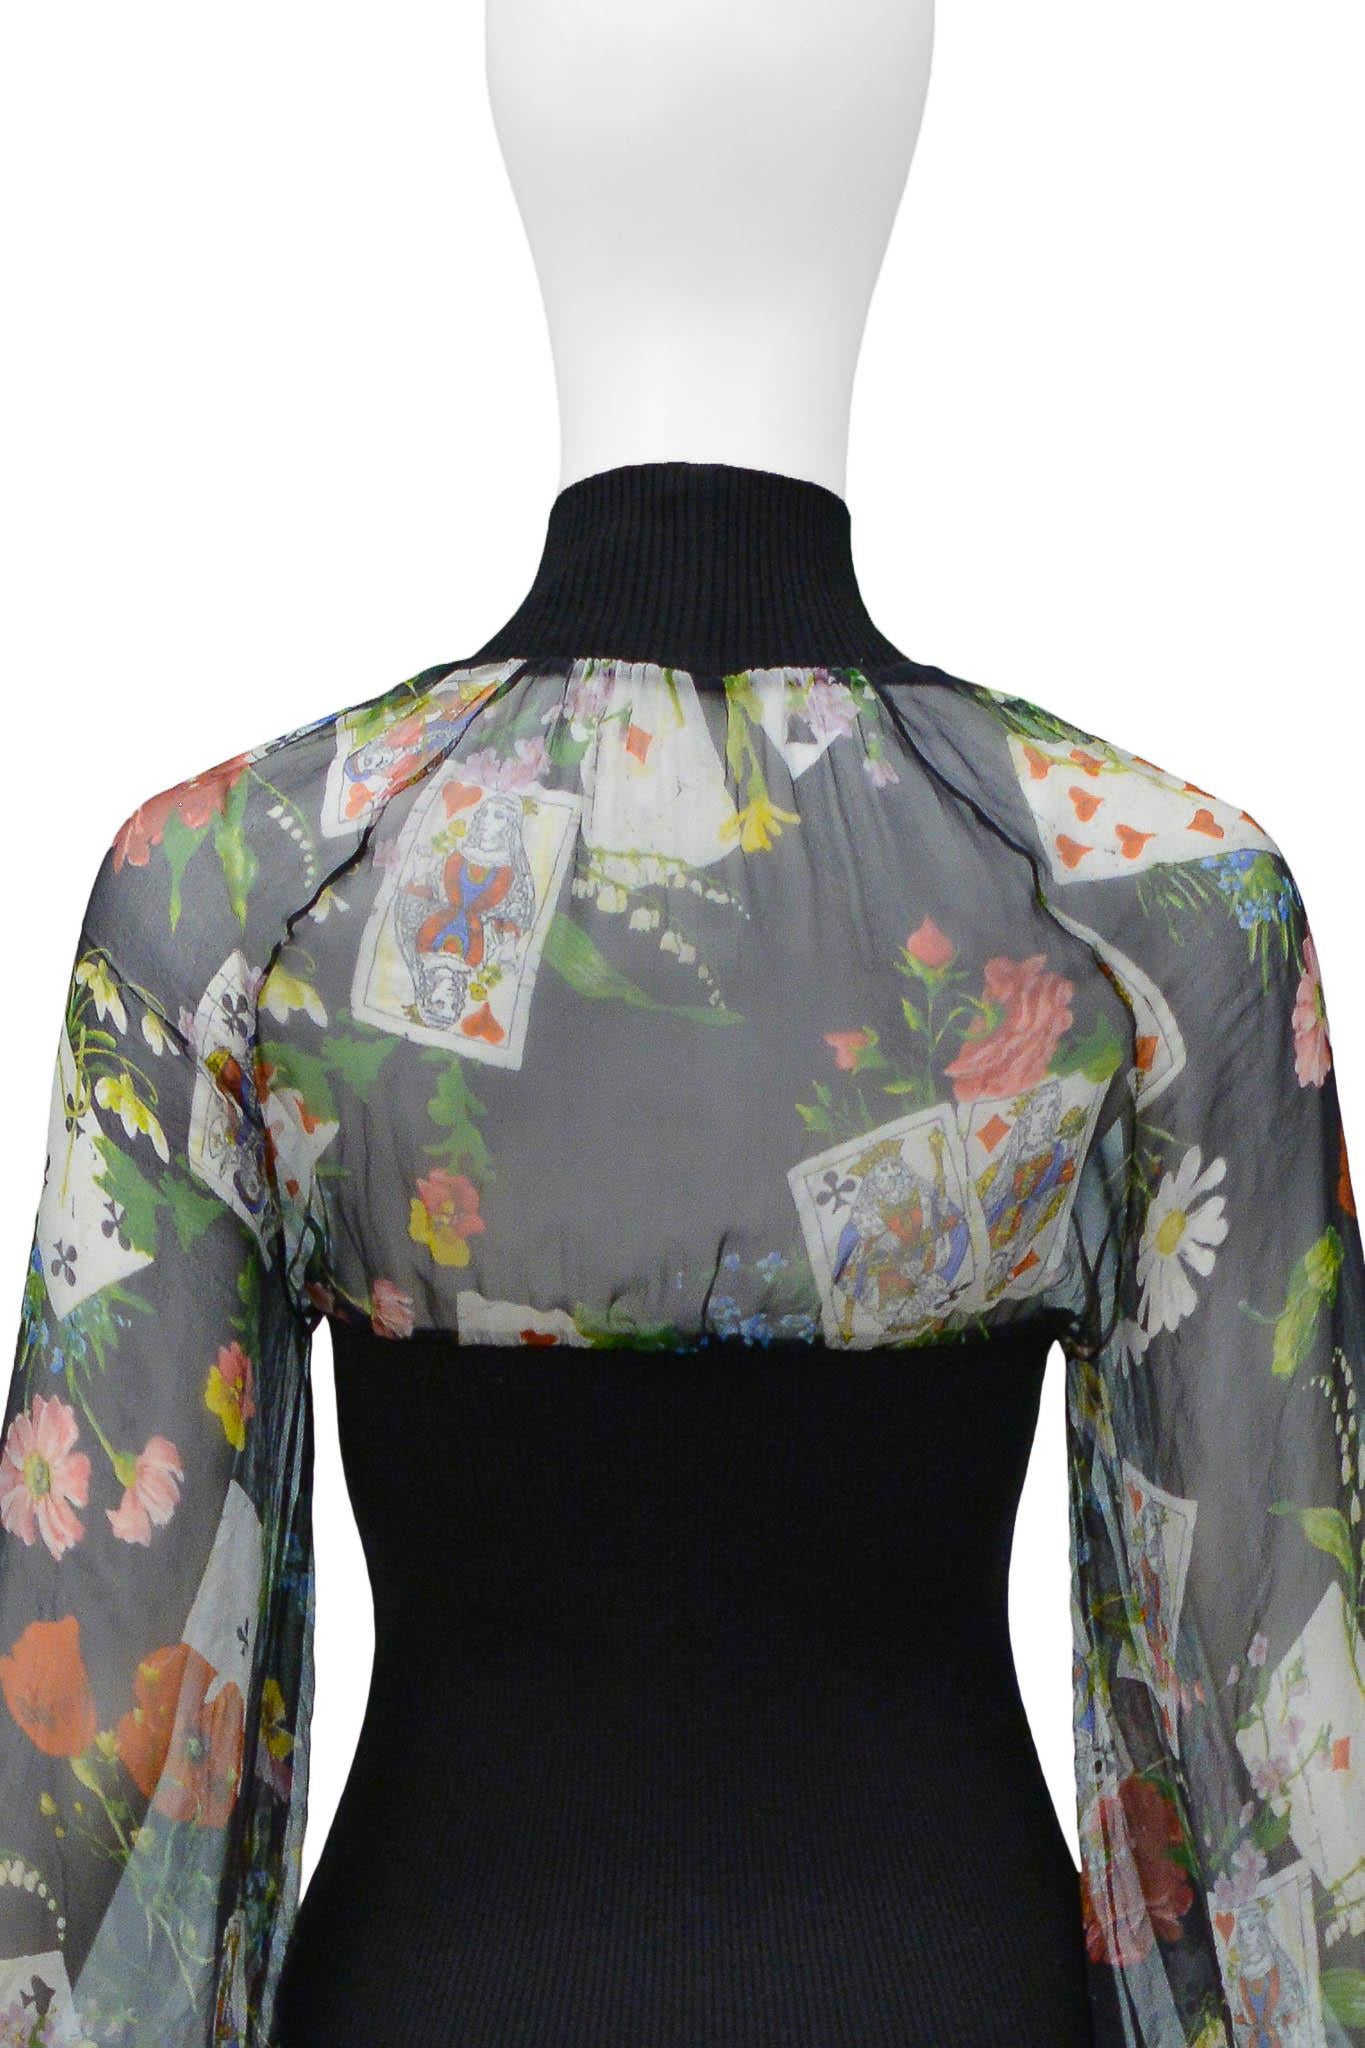 Resurrection Vintage is excited to offer a vintage Christian Dior knit wool dress featuring, playing card print on chiffon, sheer chest and sleeves, and rib neck and cuffs.

Christian Dior
Size 40
Silk, Wool, Polyester 
Excellent Vintage Condition